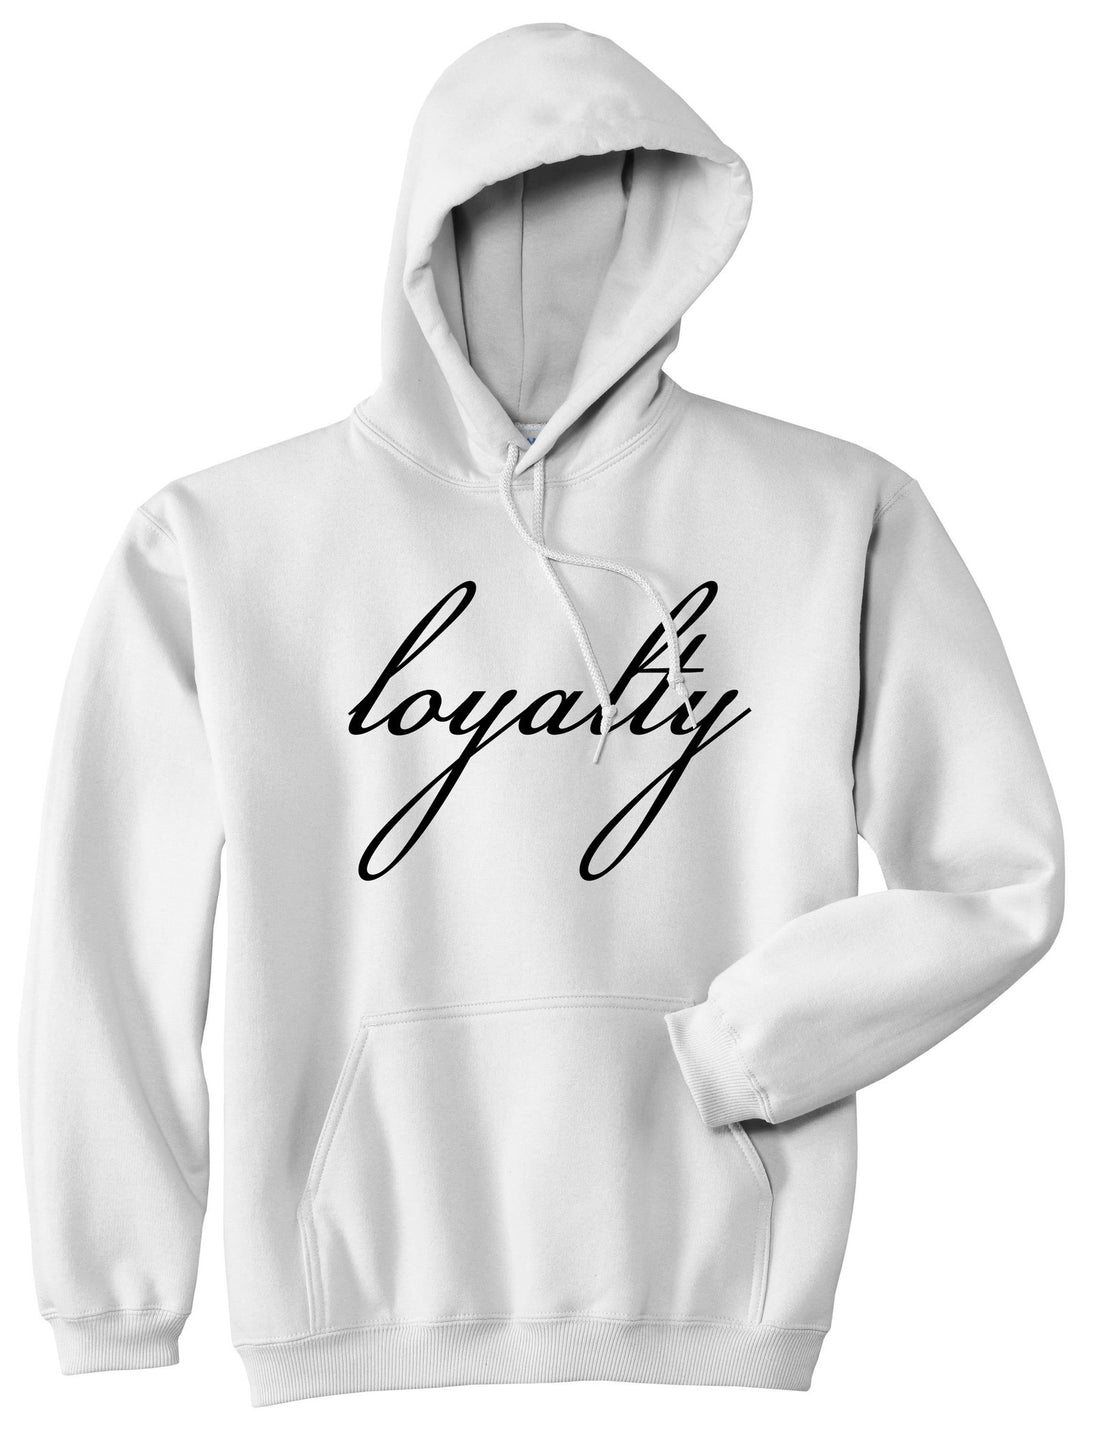 Loyalty Respect Aint New York Hoes Boys Kids Pullover Hoodie Hoody in White by Kings Of NY